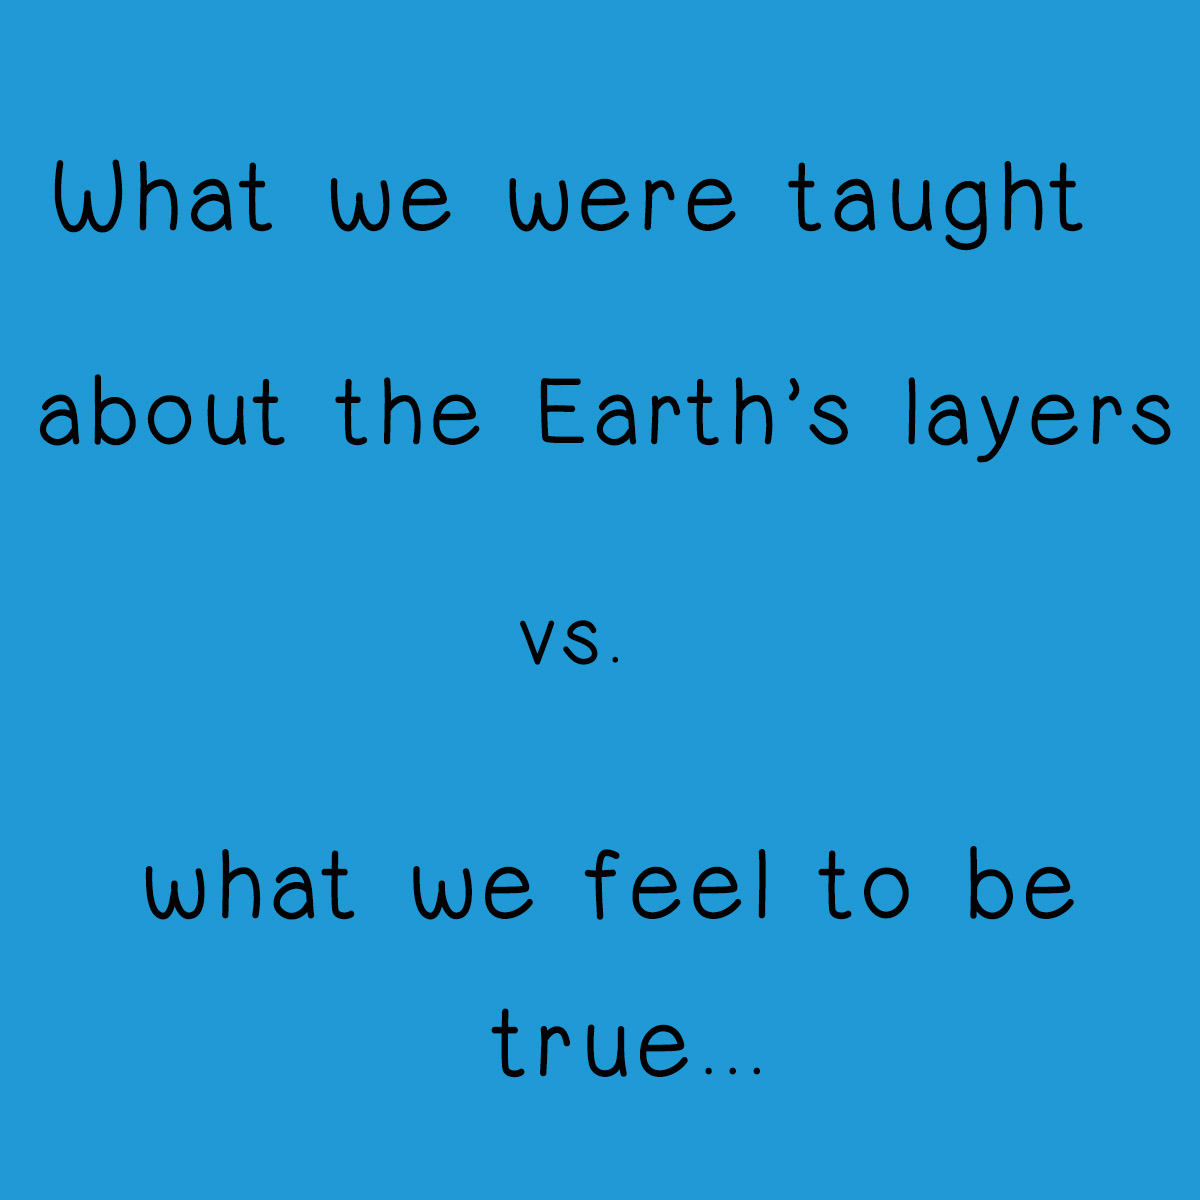 What we were taught about the Earth's layers versus what we feel to be true